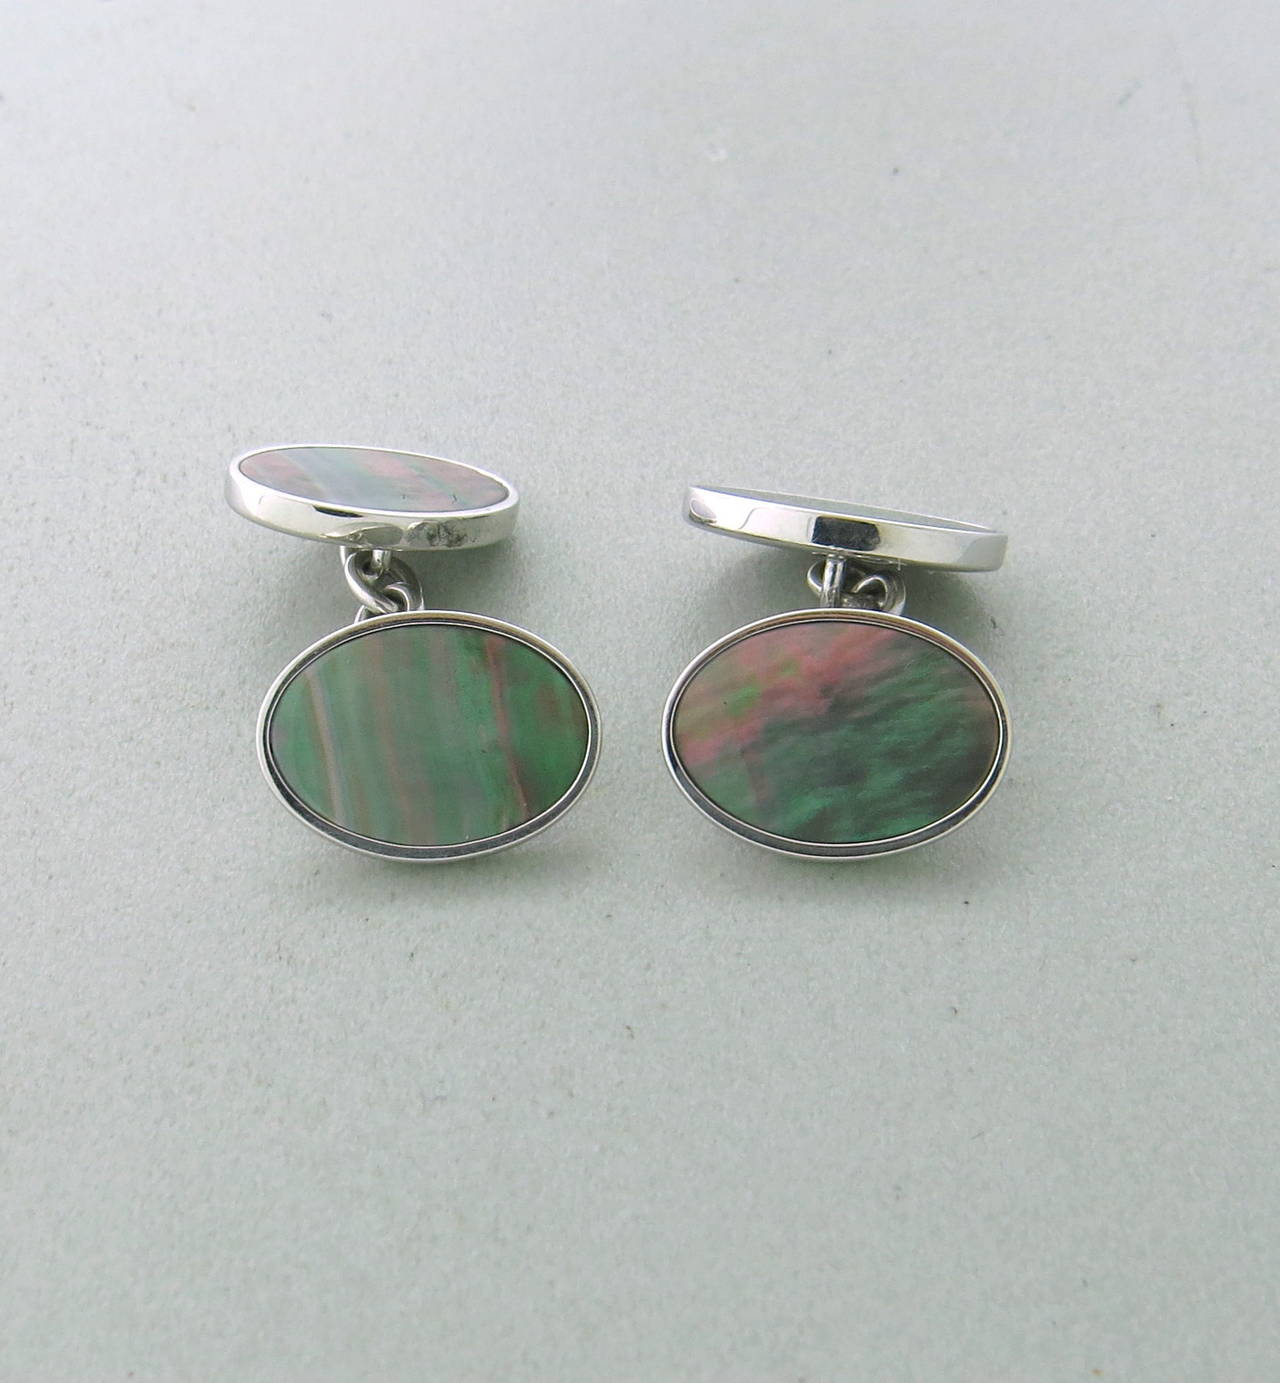 Trianon 18k gold oval cufflinks with black mother of pearl top, measuring 15mm x 11mm. weight - 9.8gr.